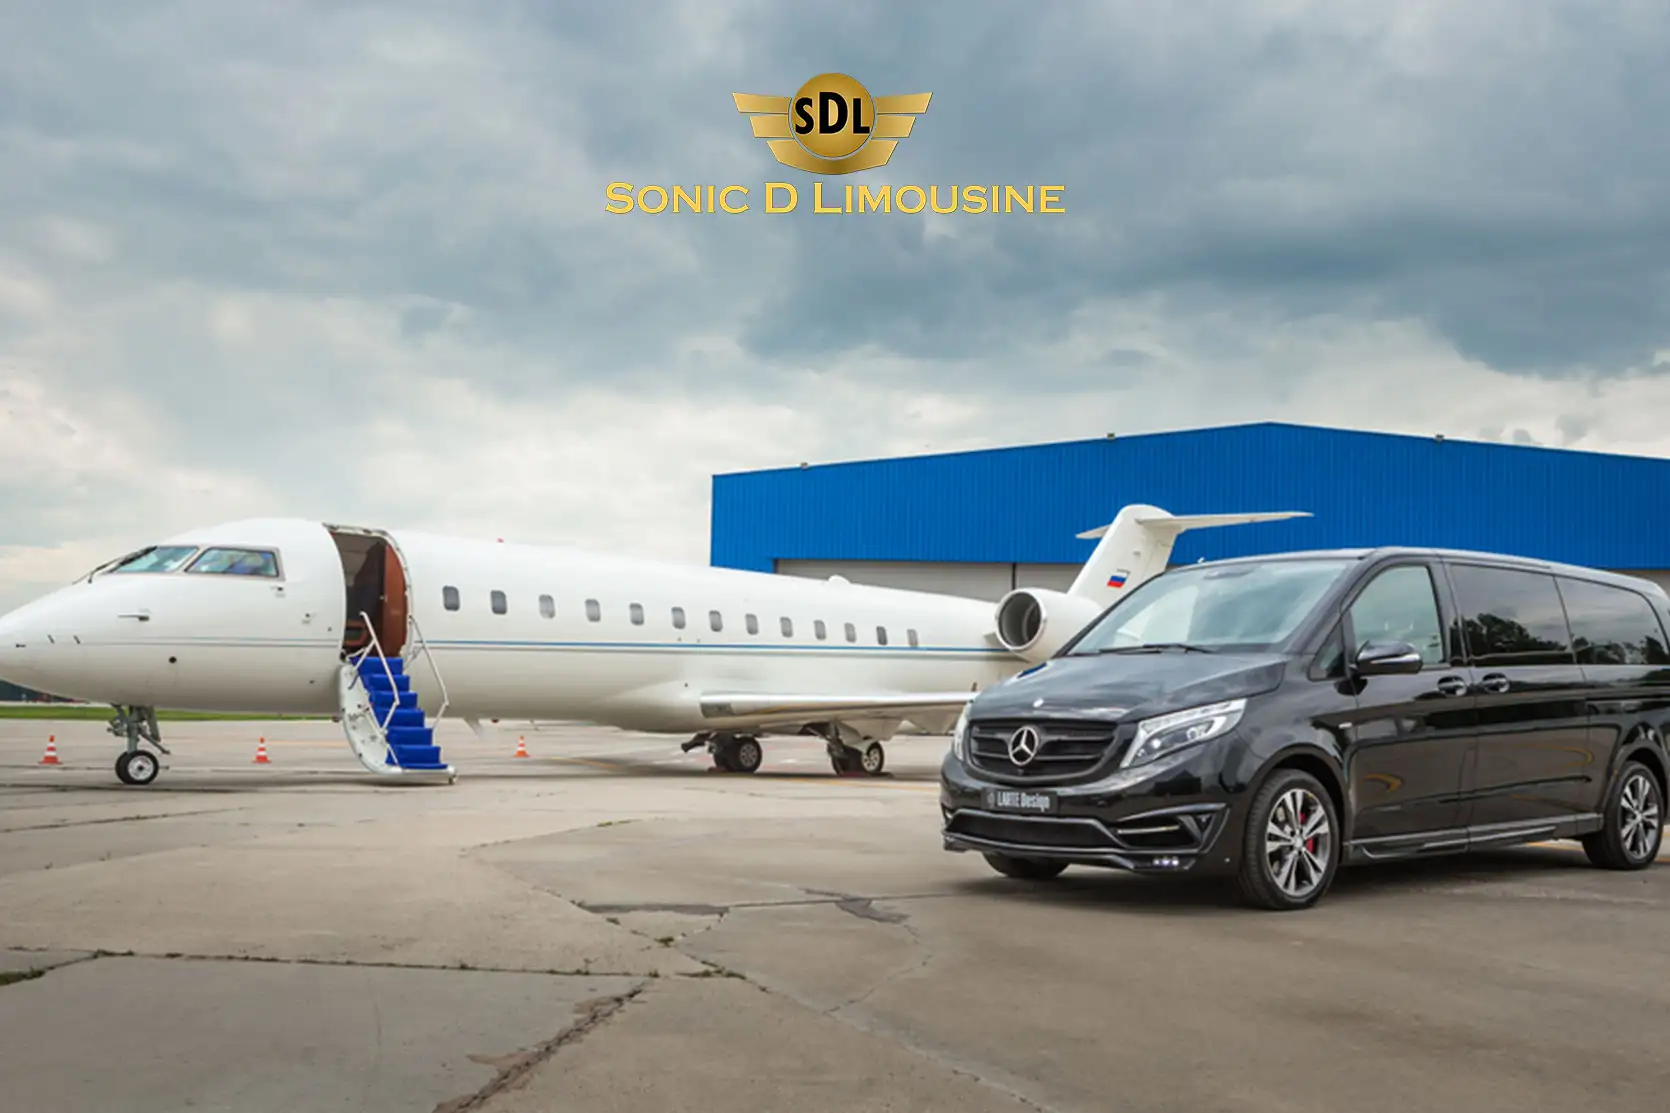 Sonic D Limousine A mercedes benz vito parked next to an airplane.